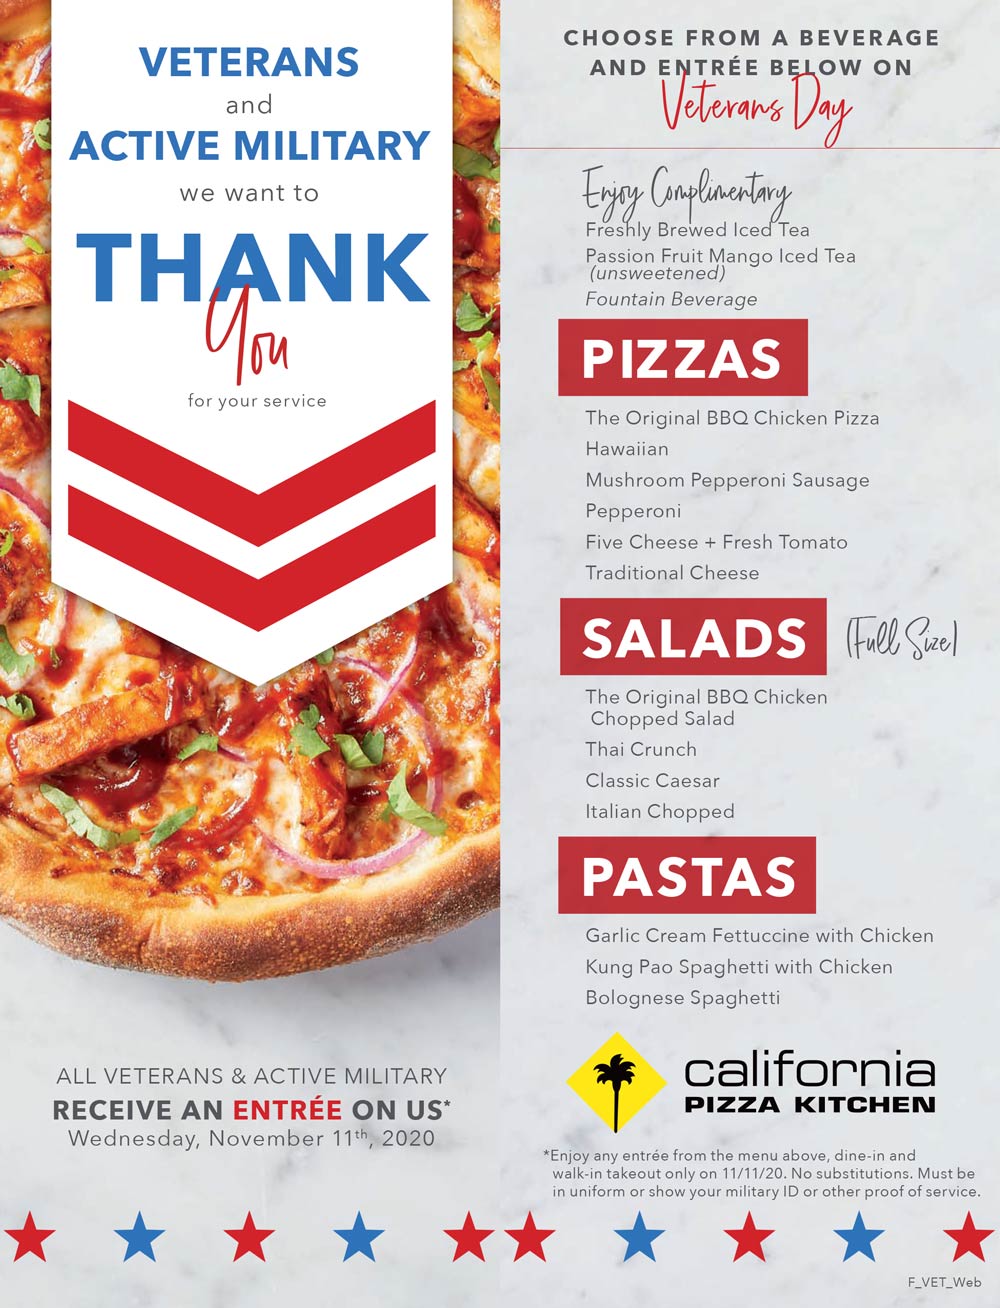 California Pizza Kitchen restaurants Coupon  Free meal for veterans and military today at CPK California Pizza Kitchen #californiapizzakitchen 